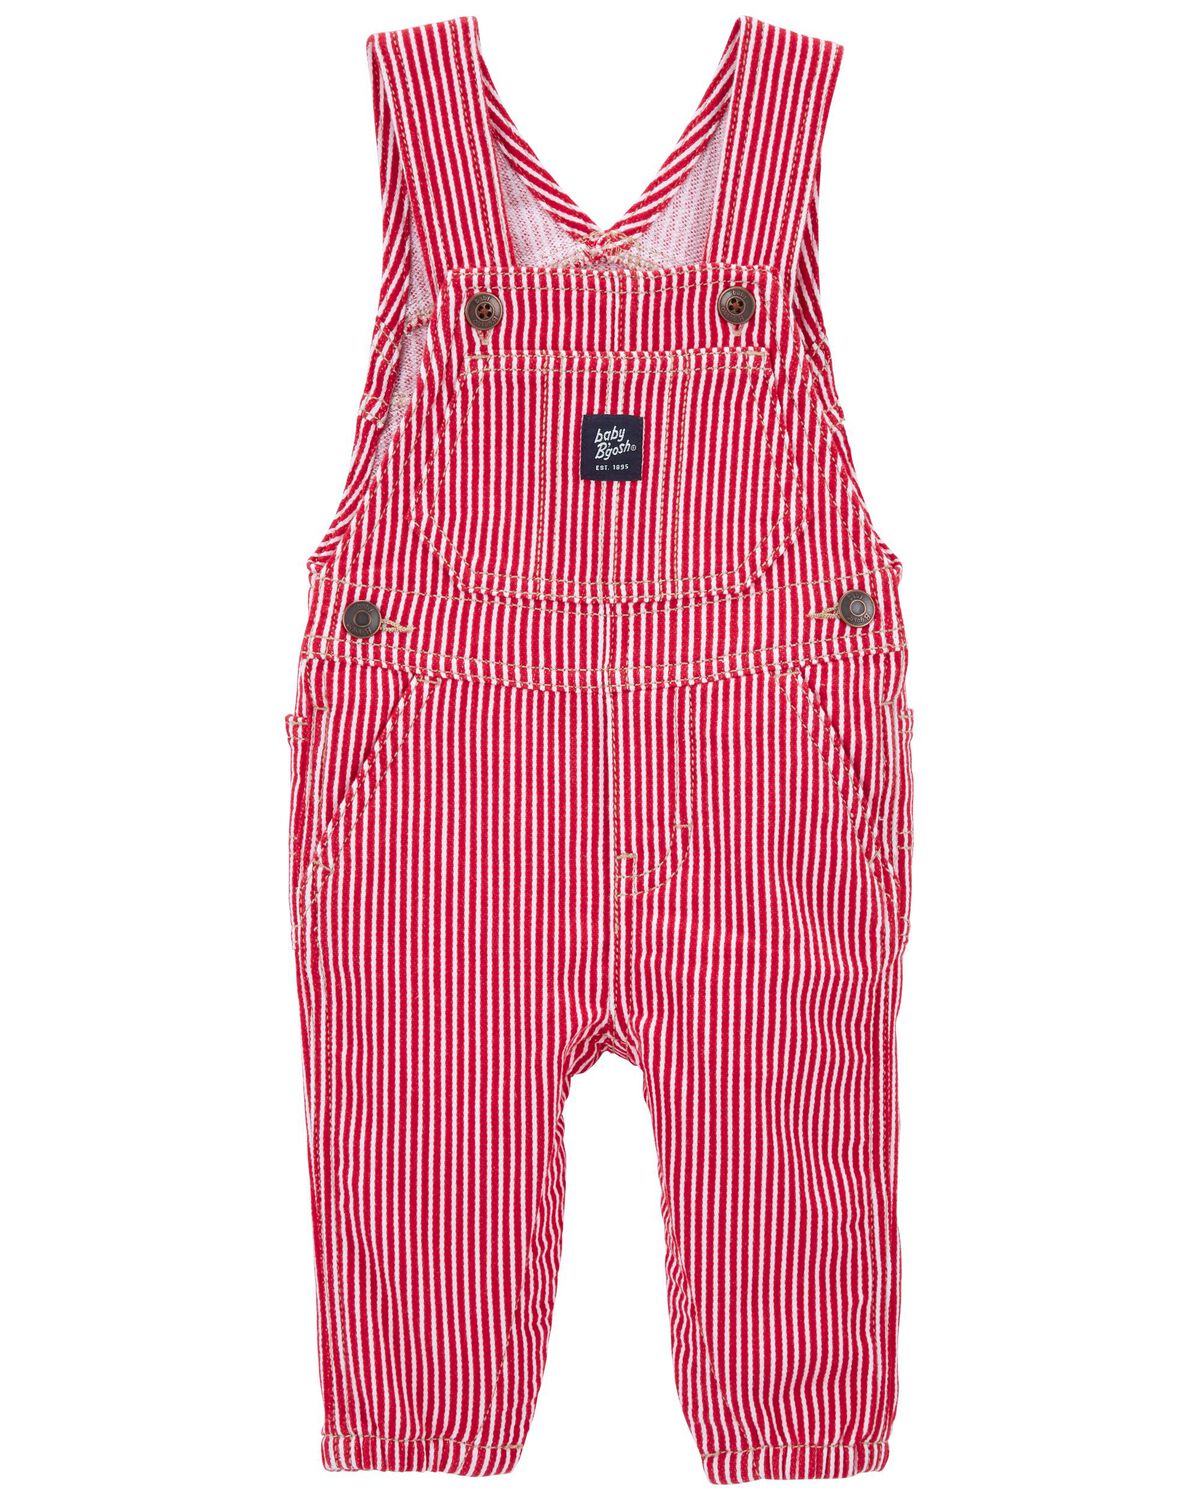 Baby Stretchy Hickory Stripe Overalls